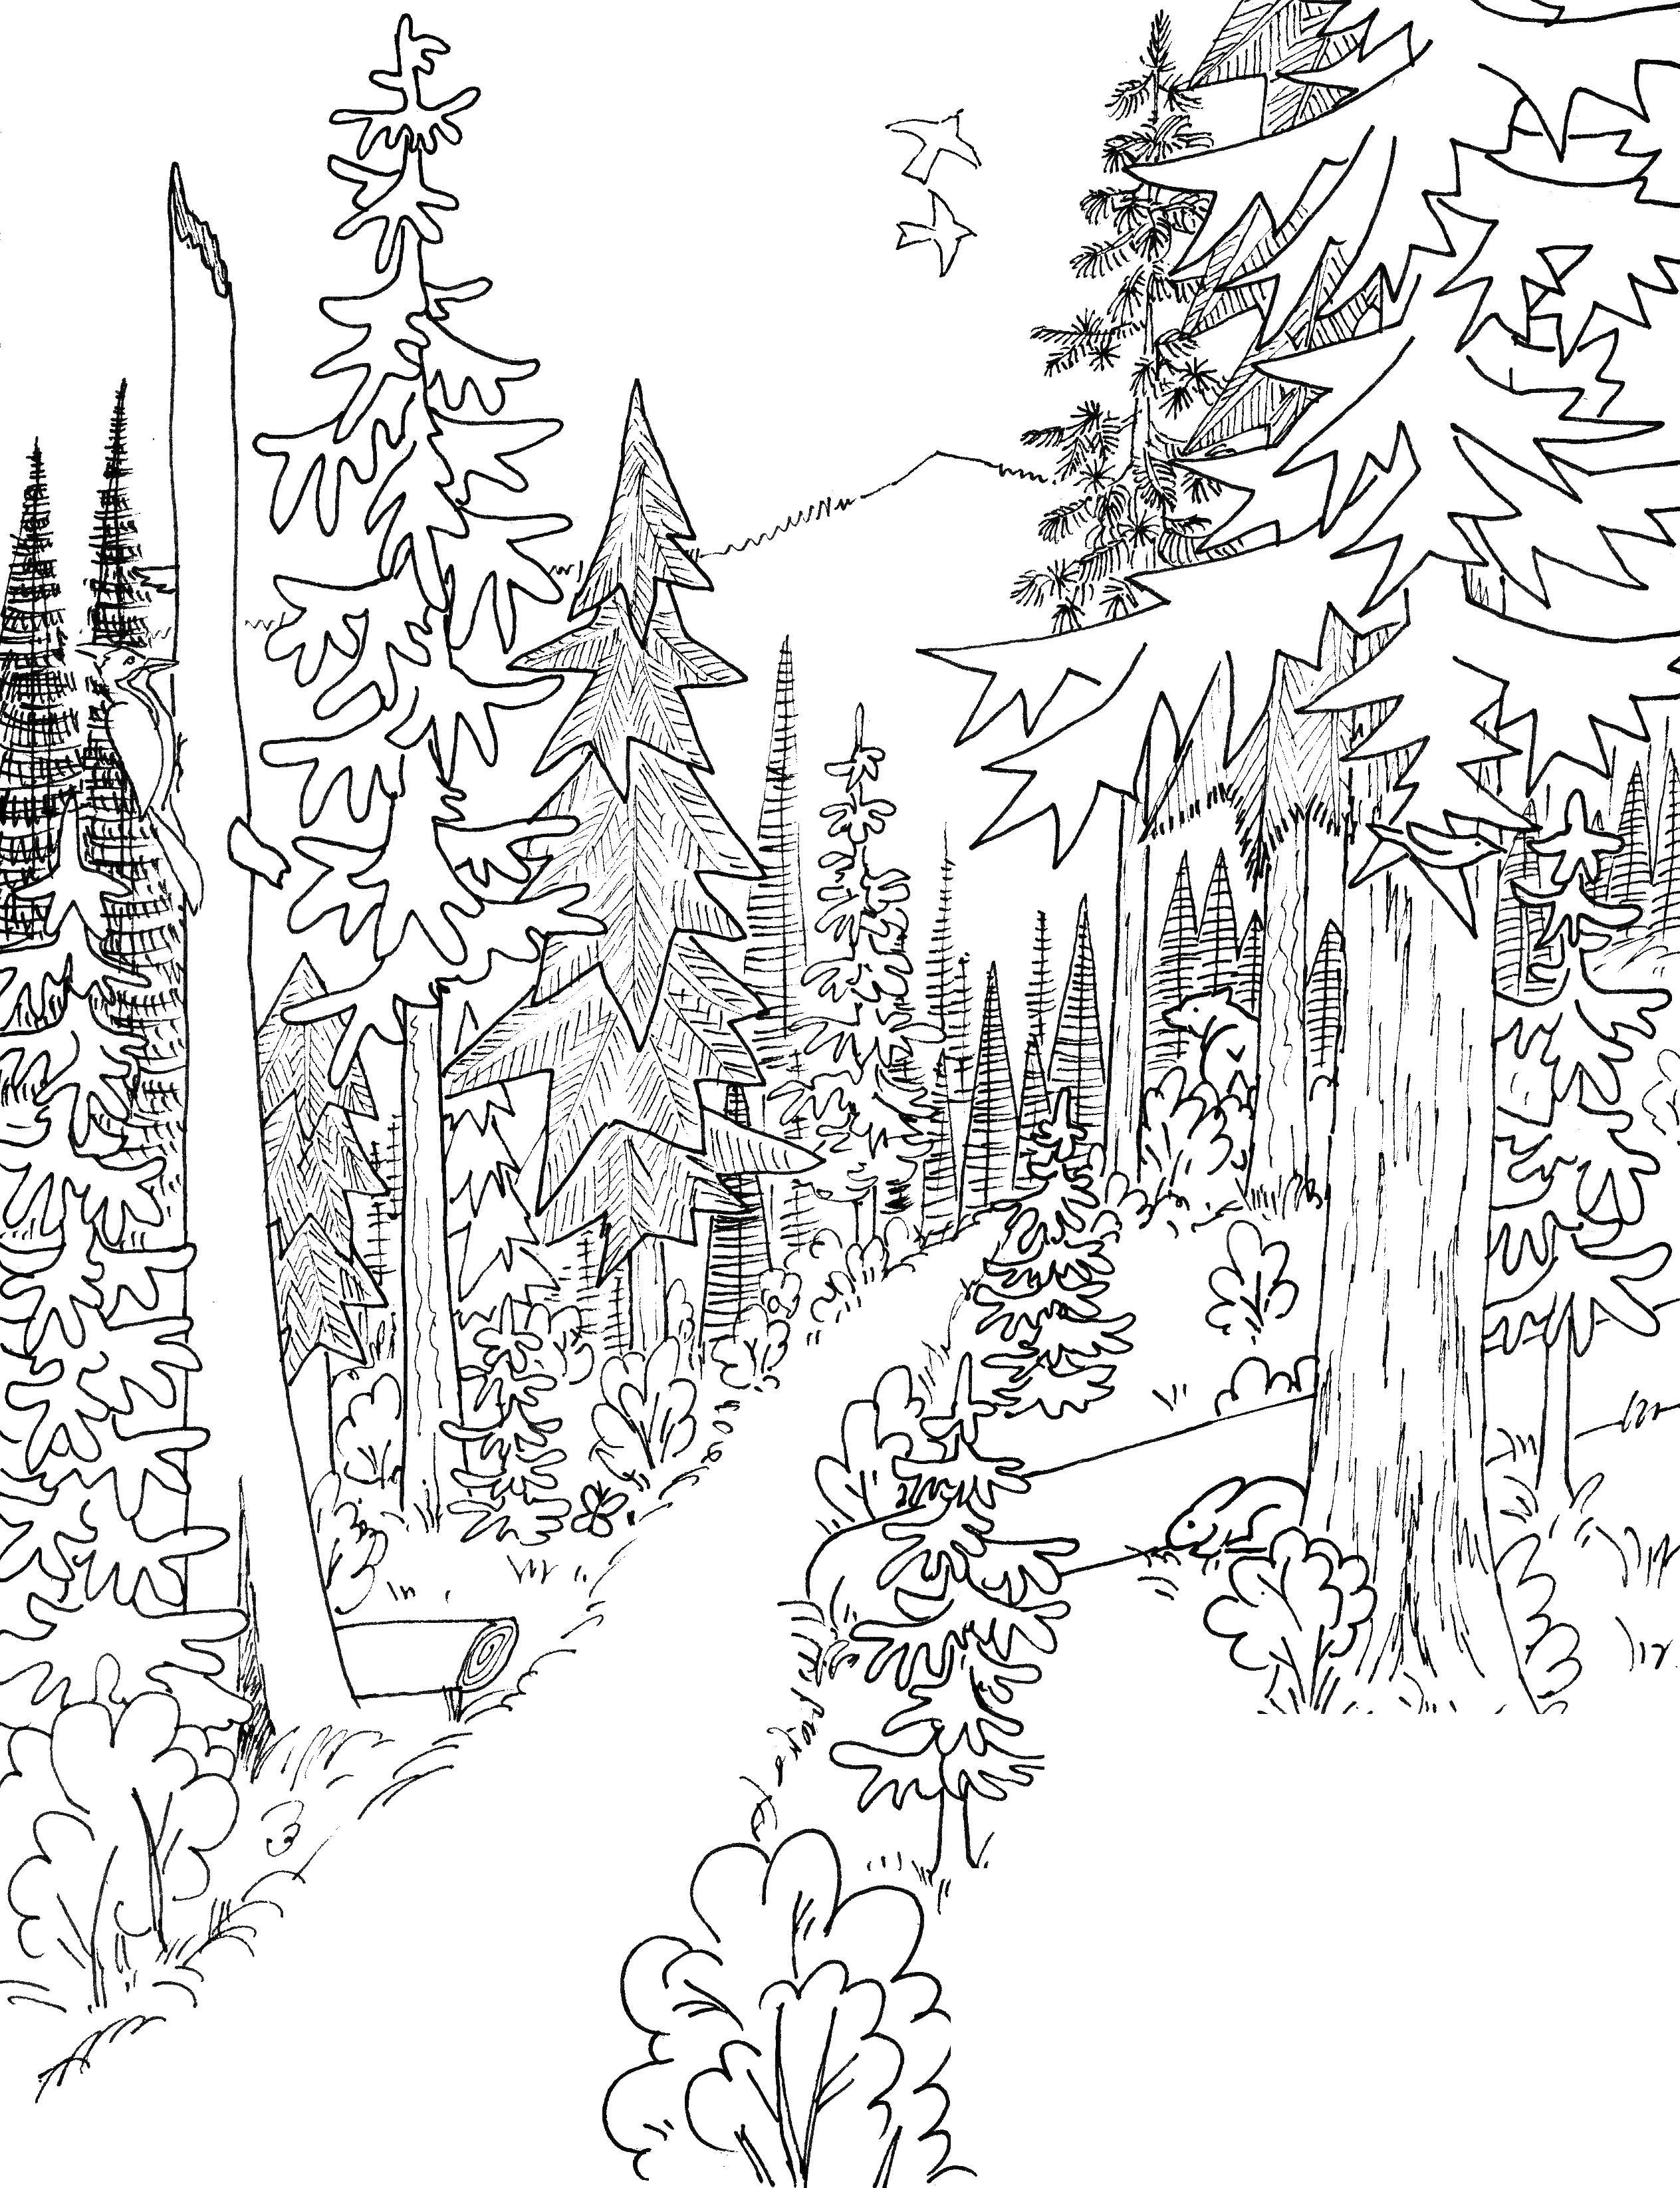 Coloring Forest. Category nature. Tags:  nature, forest.